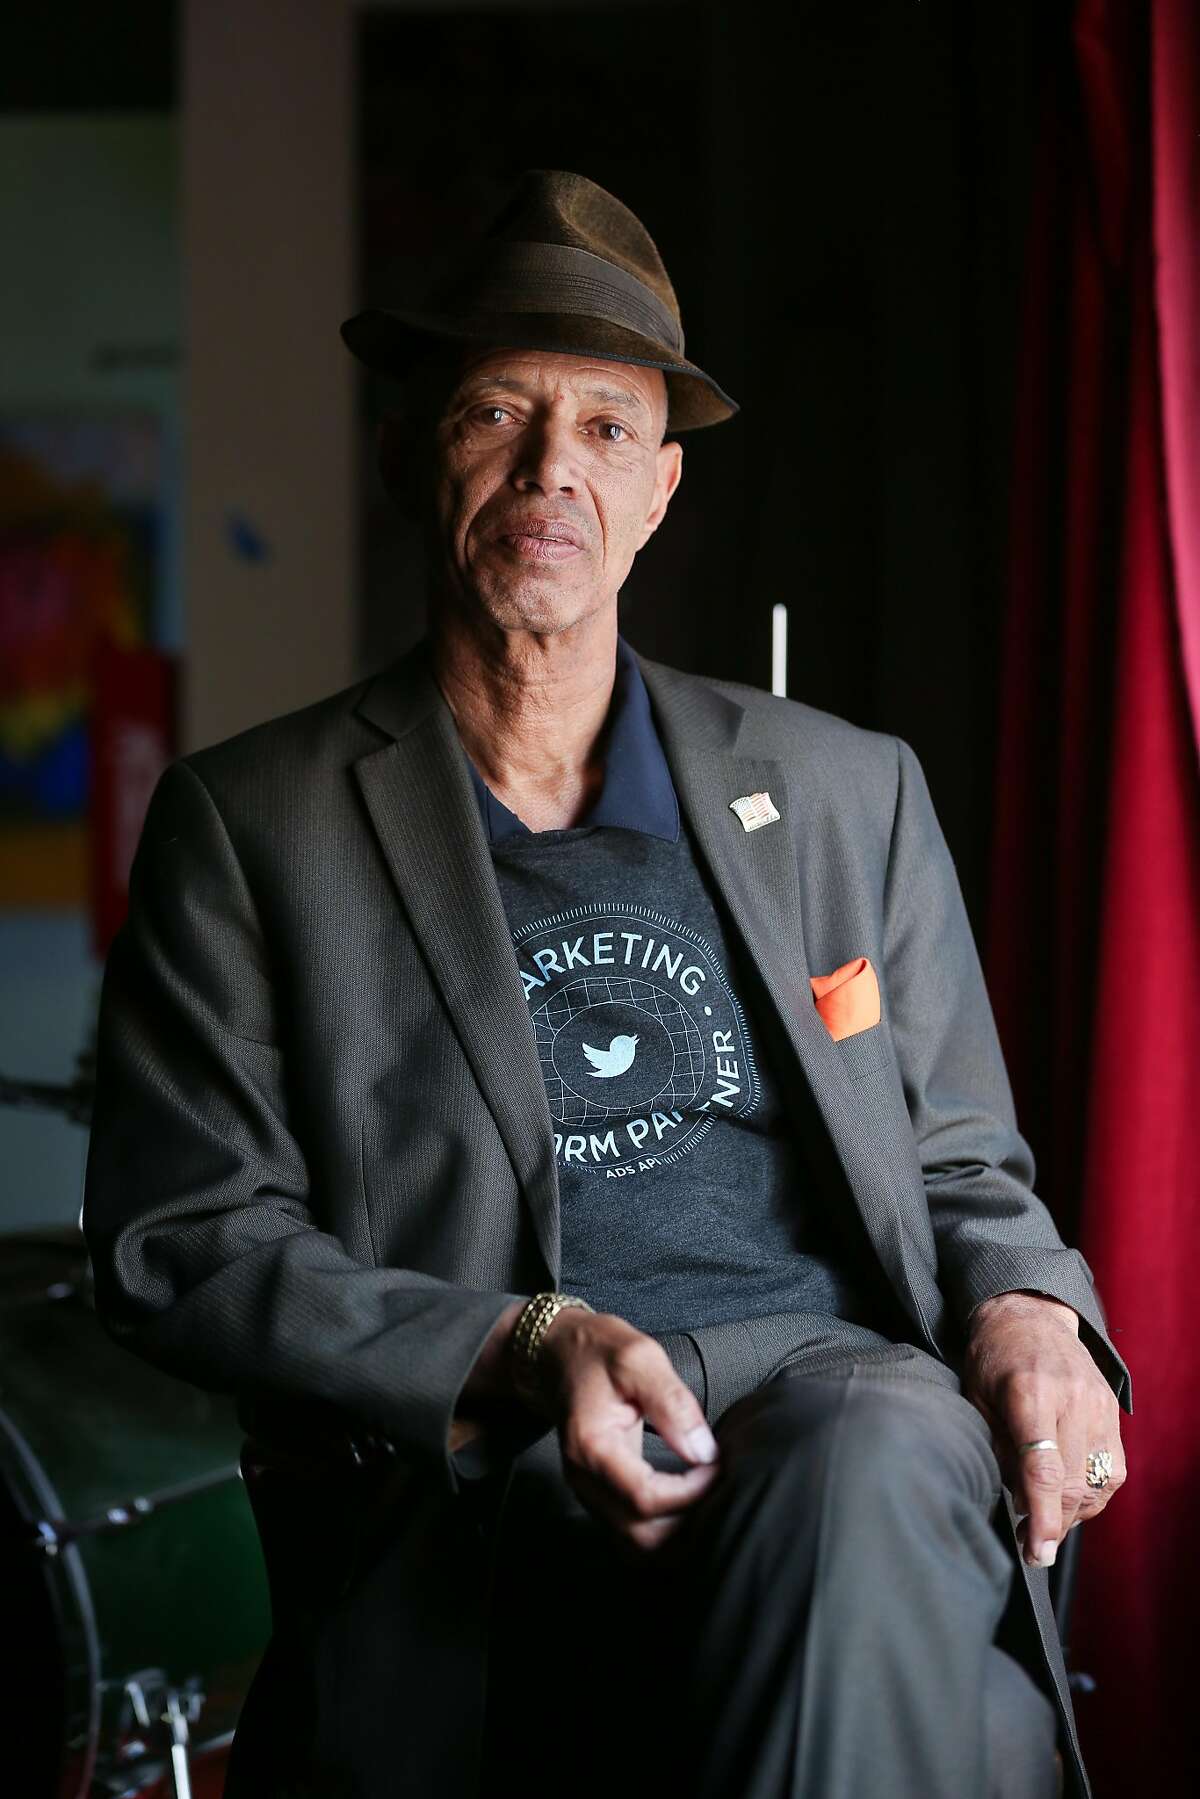 Del Seymour, founder of a job readiness program called Code Tenderloin, at PianoFight on Wednesday, November 16, 2016 in San Francisco, Calif.